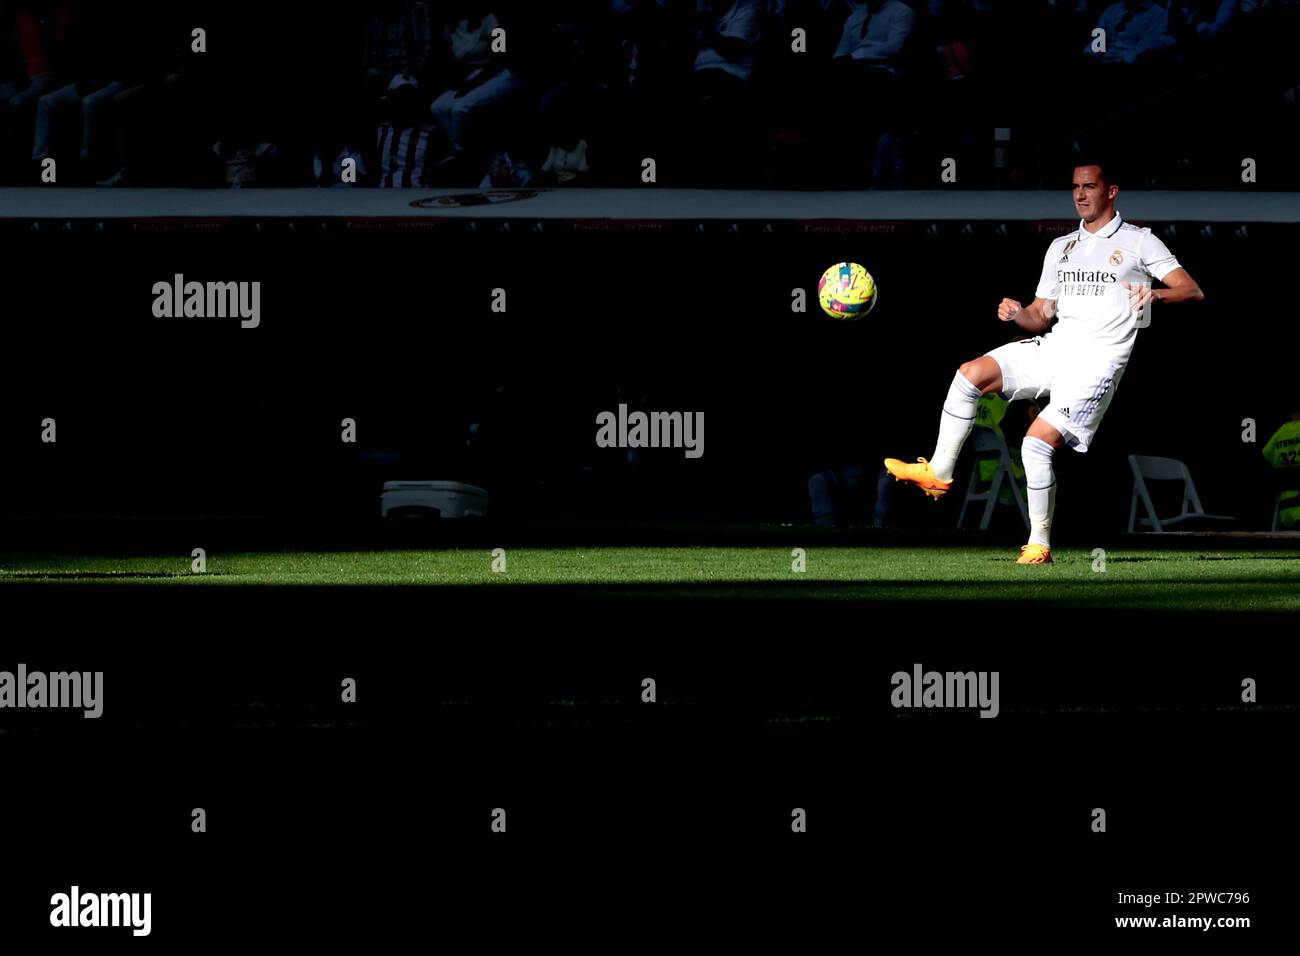 Madrid, Spain. 29th Apr, 2023. Madrid, Spain, 29.04.2023.- Real Madrid player Eden Hazard Real Madrid vs Almeria match of the Spanish Soccer League on matchday 32 held at the Santiago Bernabeu Stadium in the capital of the Kingdom of Spain. Final result 4-2. Real Madrid goals from Benzema 2 ,17 , 42 (P), Rodrygo 47 . Goals from Almeria Lazaro Vinicius 40' 5, and Lucas Robertone 61' Credit: Juan Carlos Rojas/dpa/Alamy Live News Stock Photo